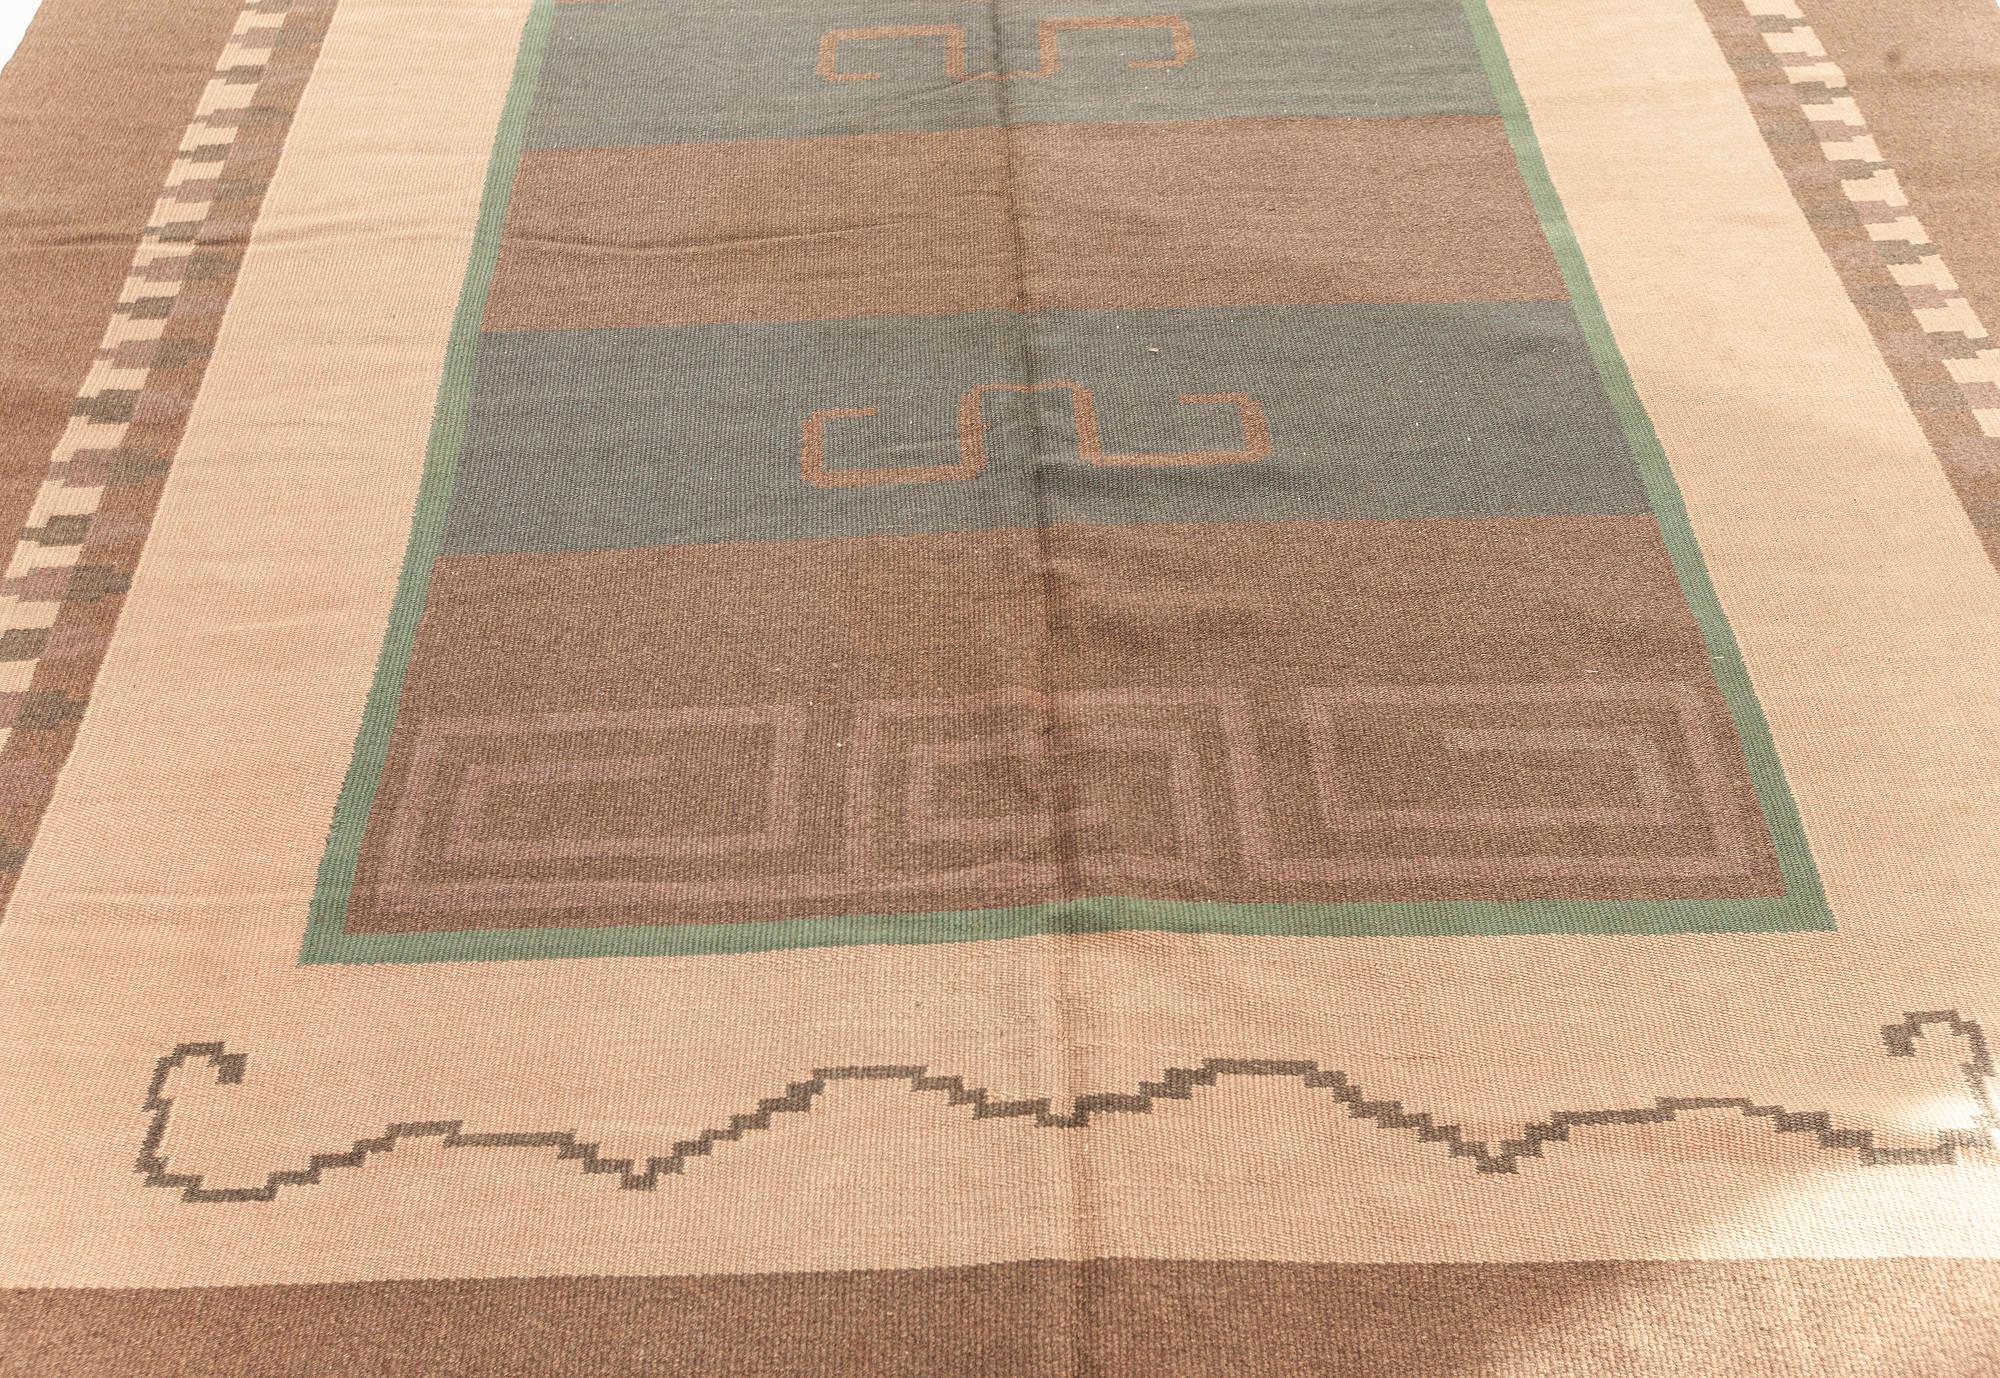 Hand-Woven Vintage Scandinavian Flat-Weave Wool Rug Woven Initials & Date to Edge 'Io 1928' For Sale